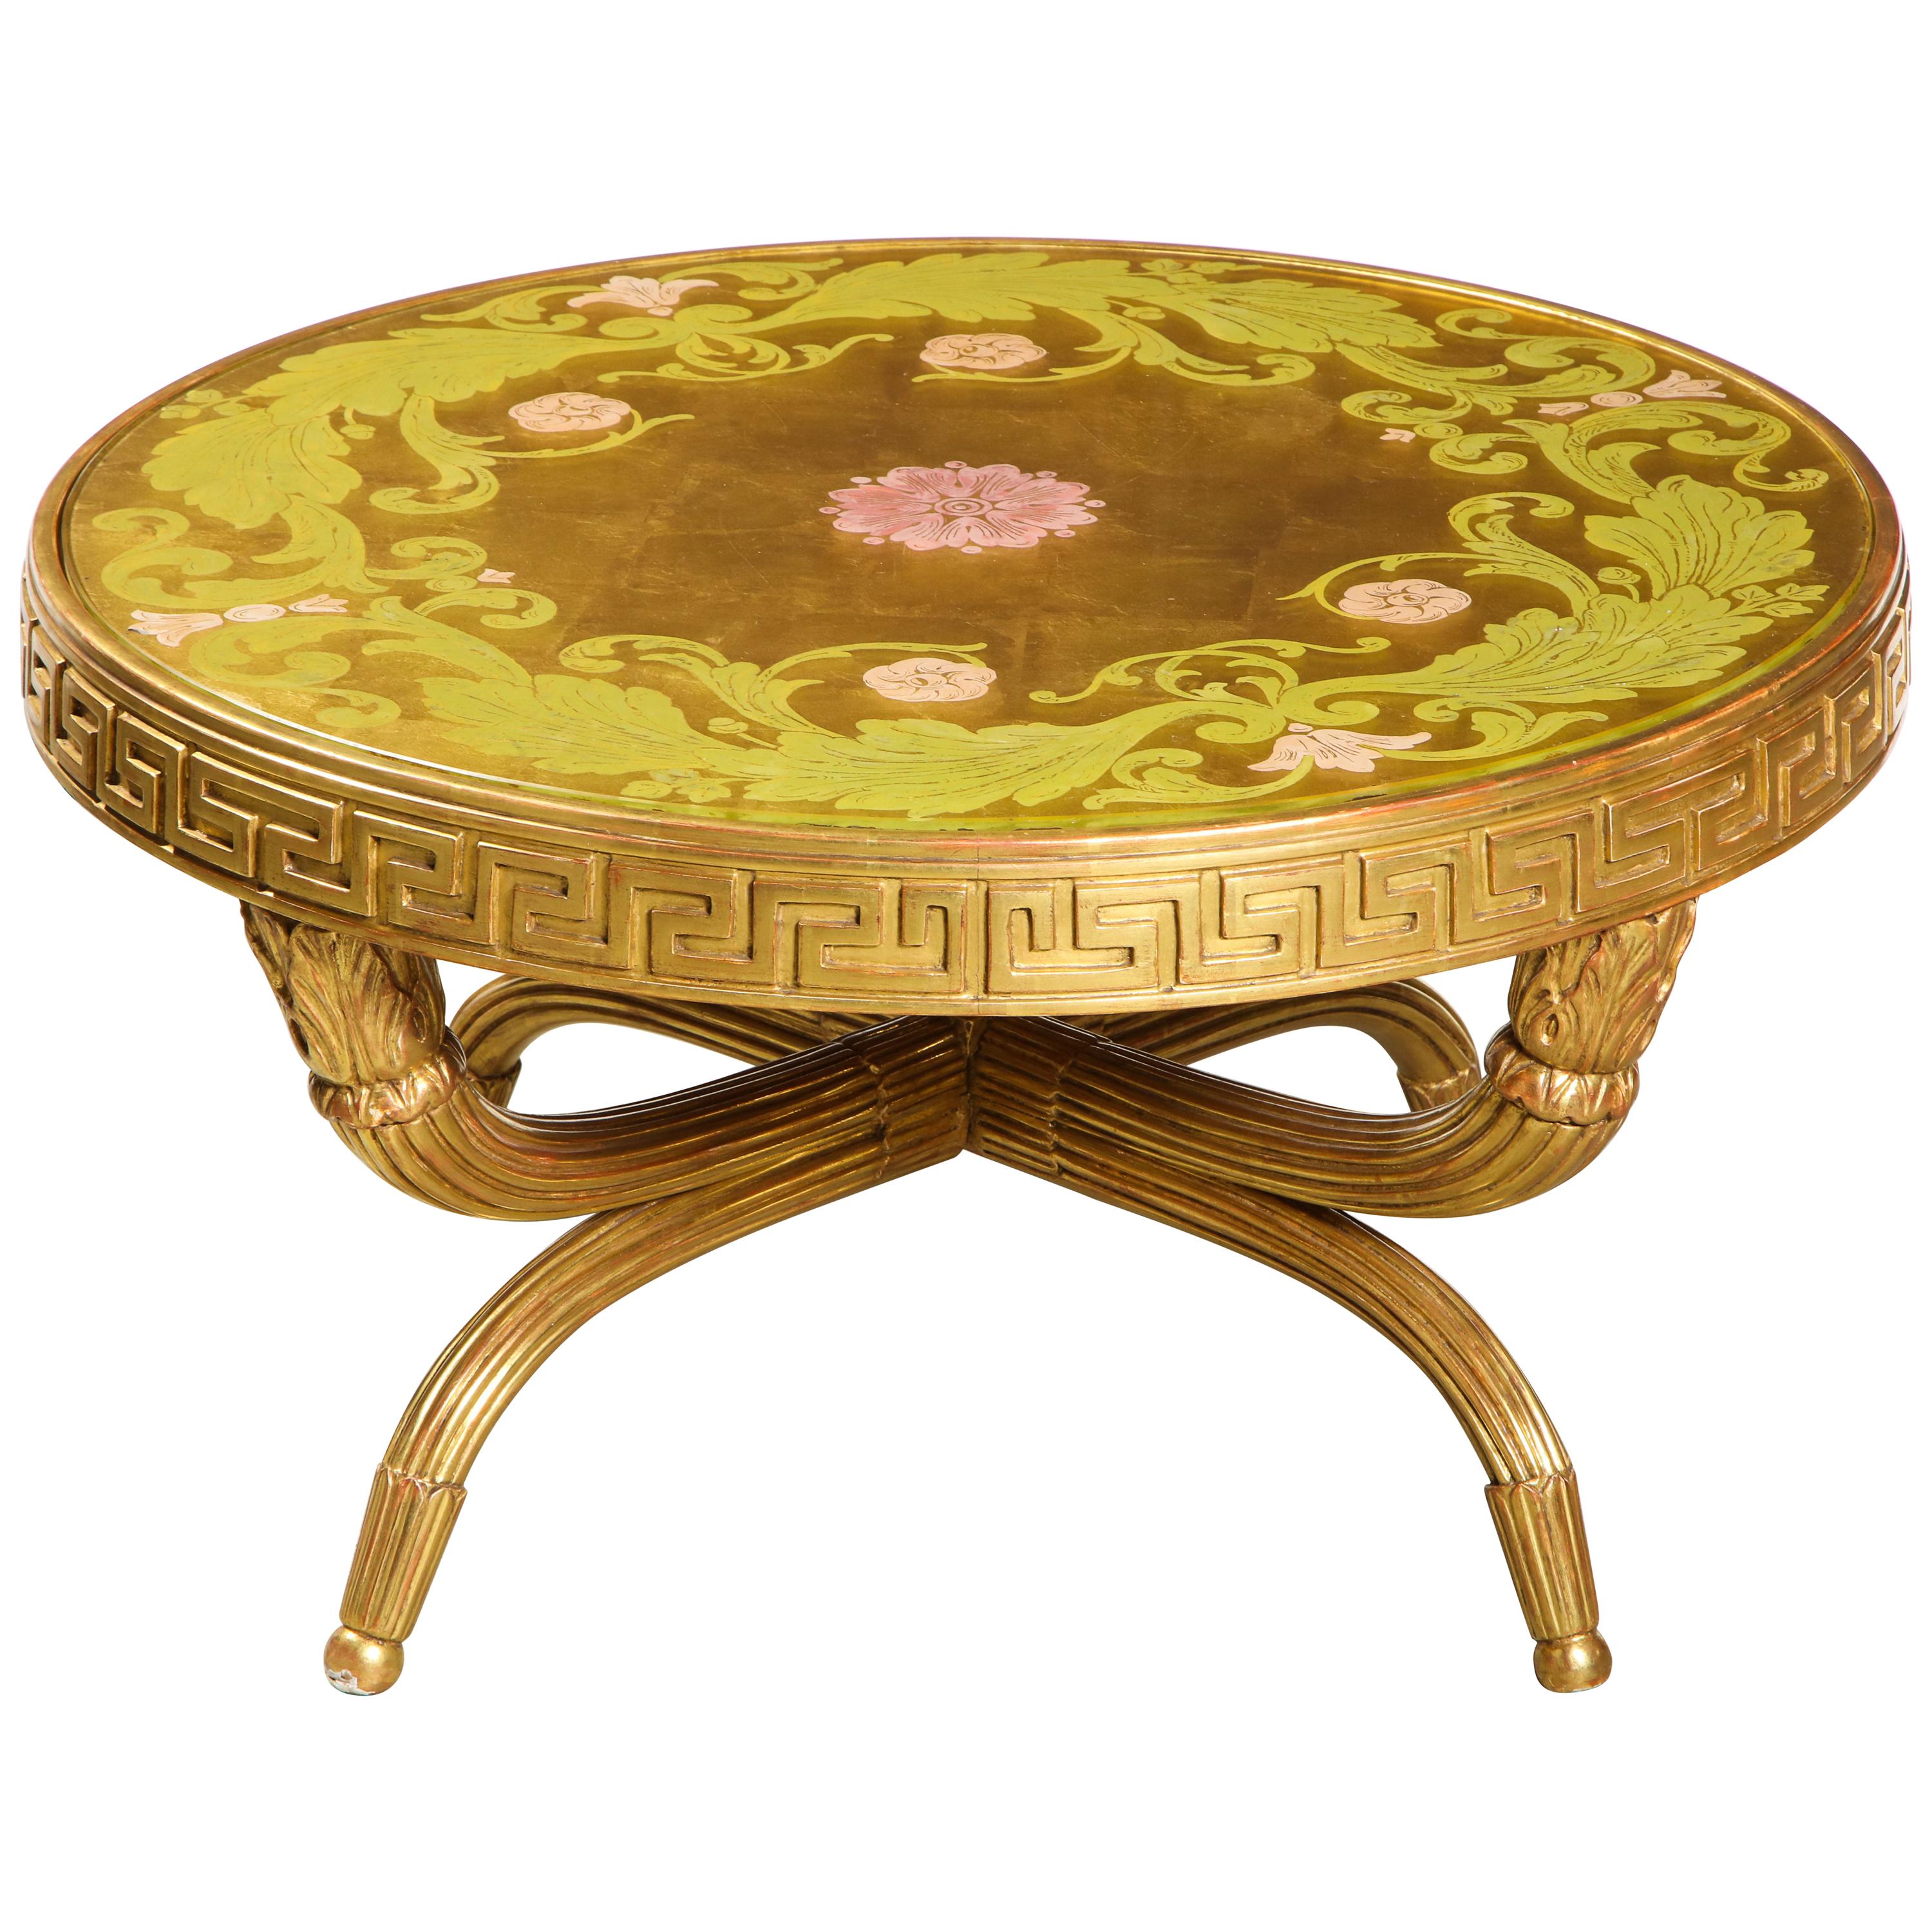 French Giltwood and Églomisé Cocktail/Coffee Table with Greek Key Design